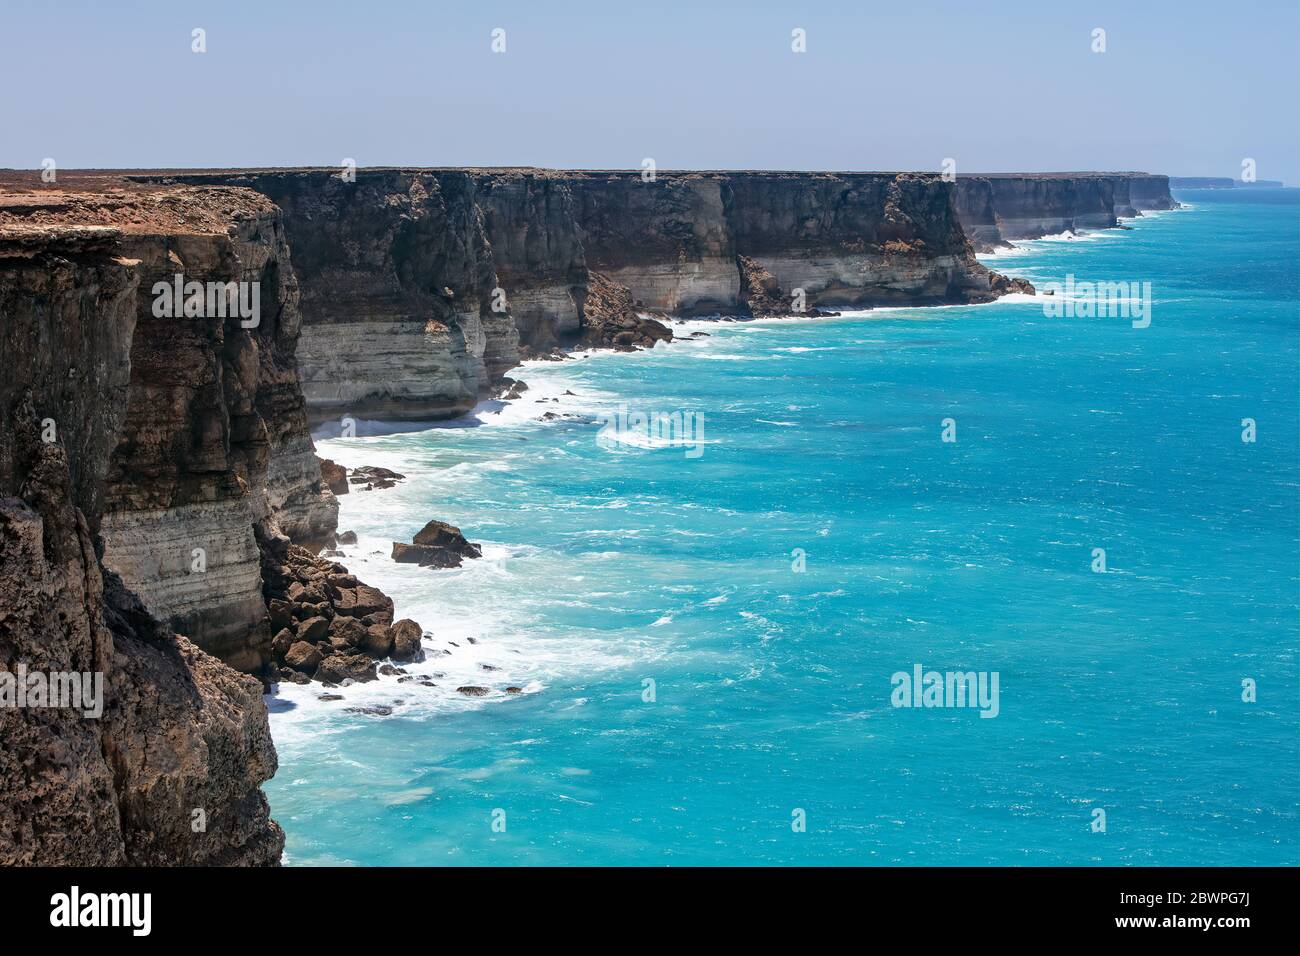 View of the limestone cliffs from the first main viewing platform on the West Australian side of the Great Australian Bight Stock Photo